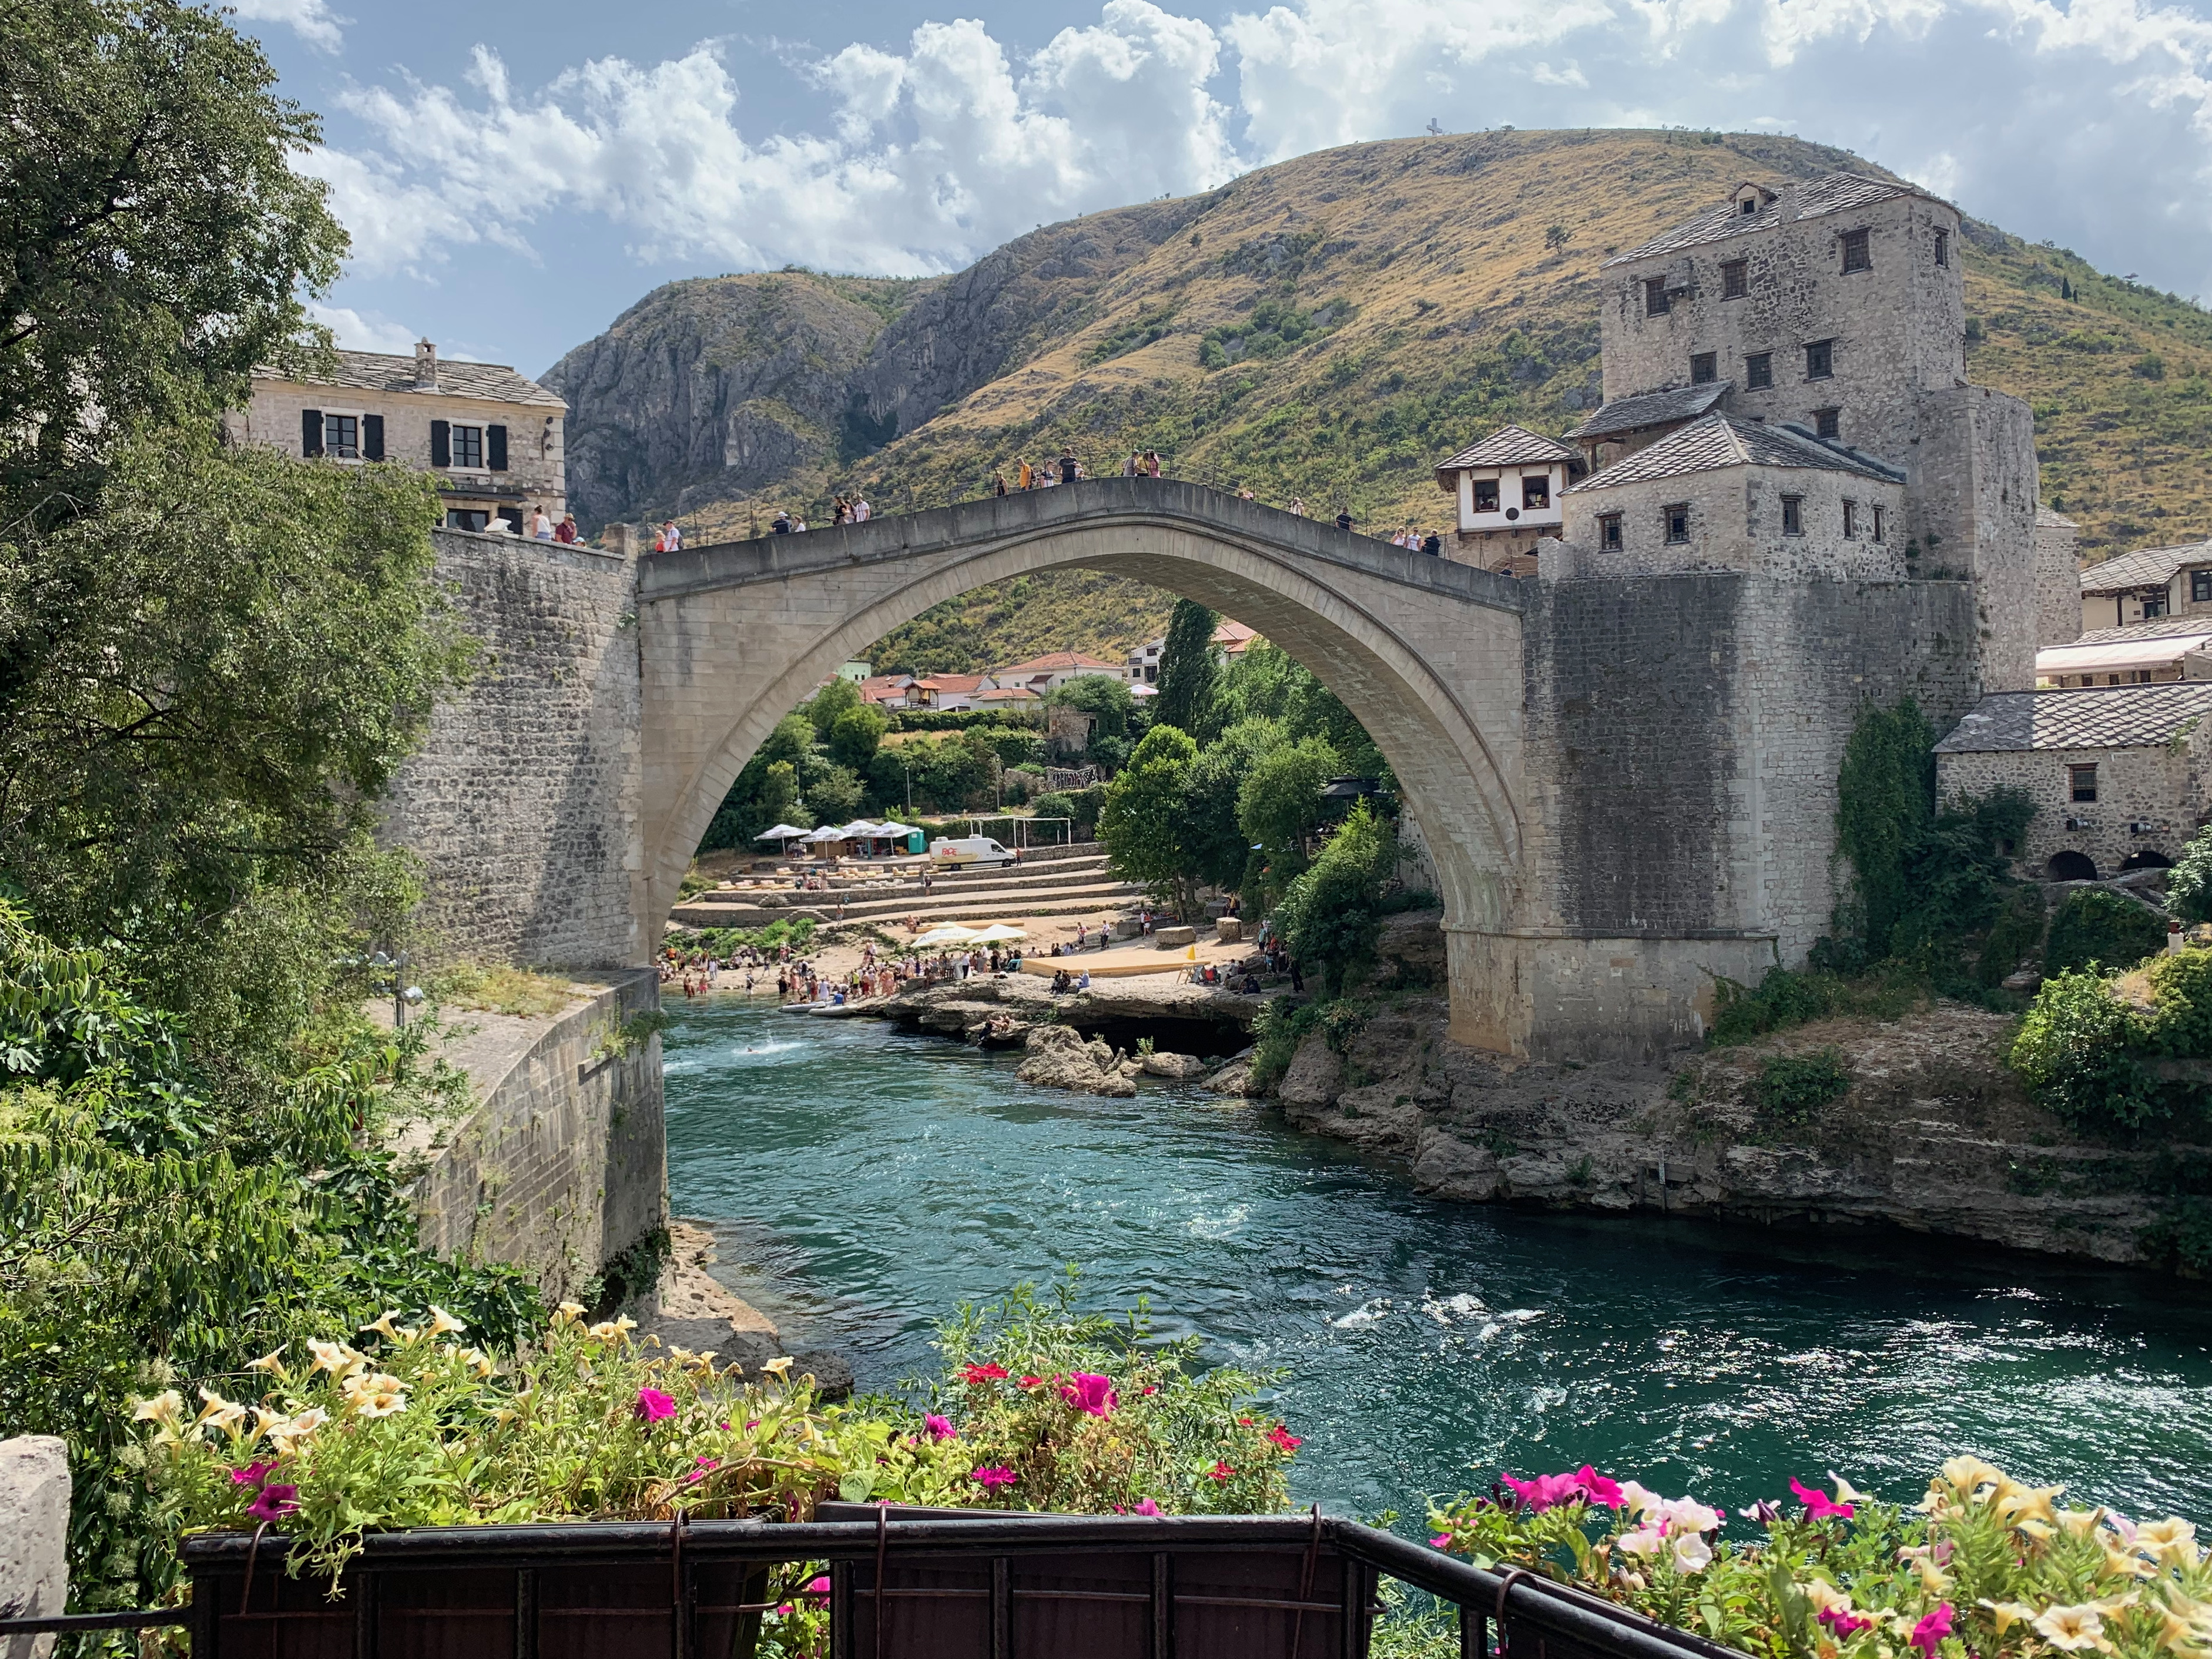 The famous old bridge in Mostar